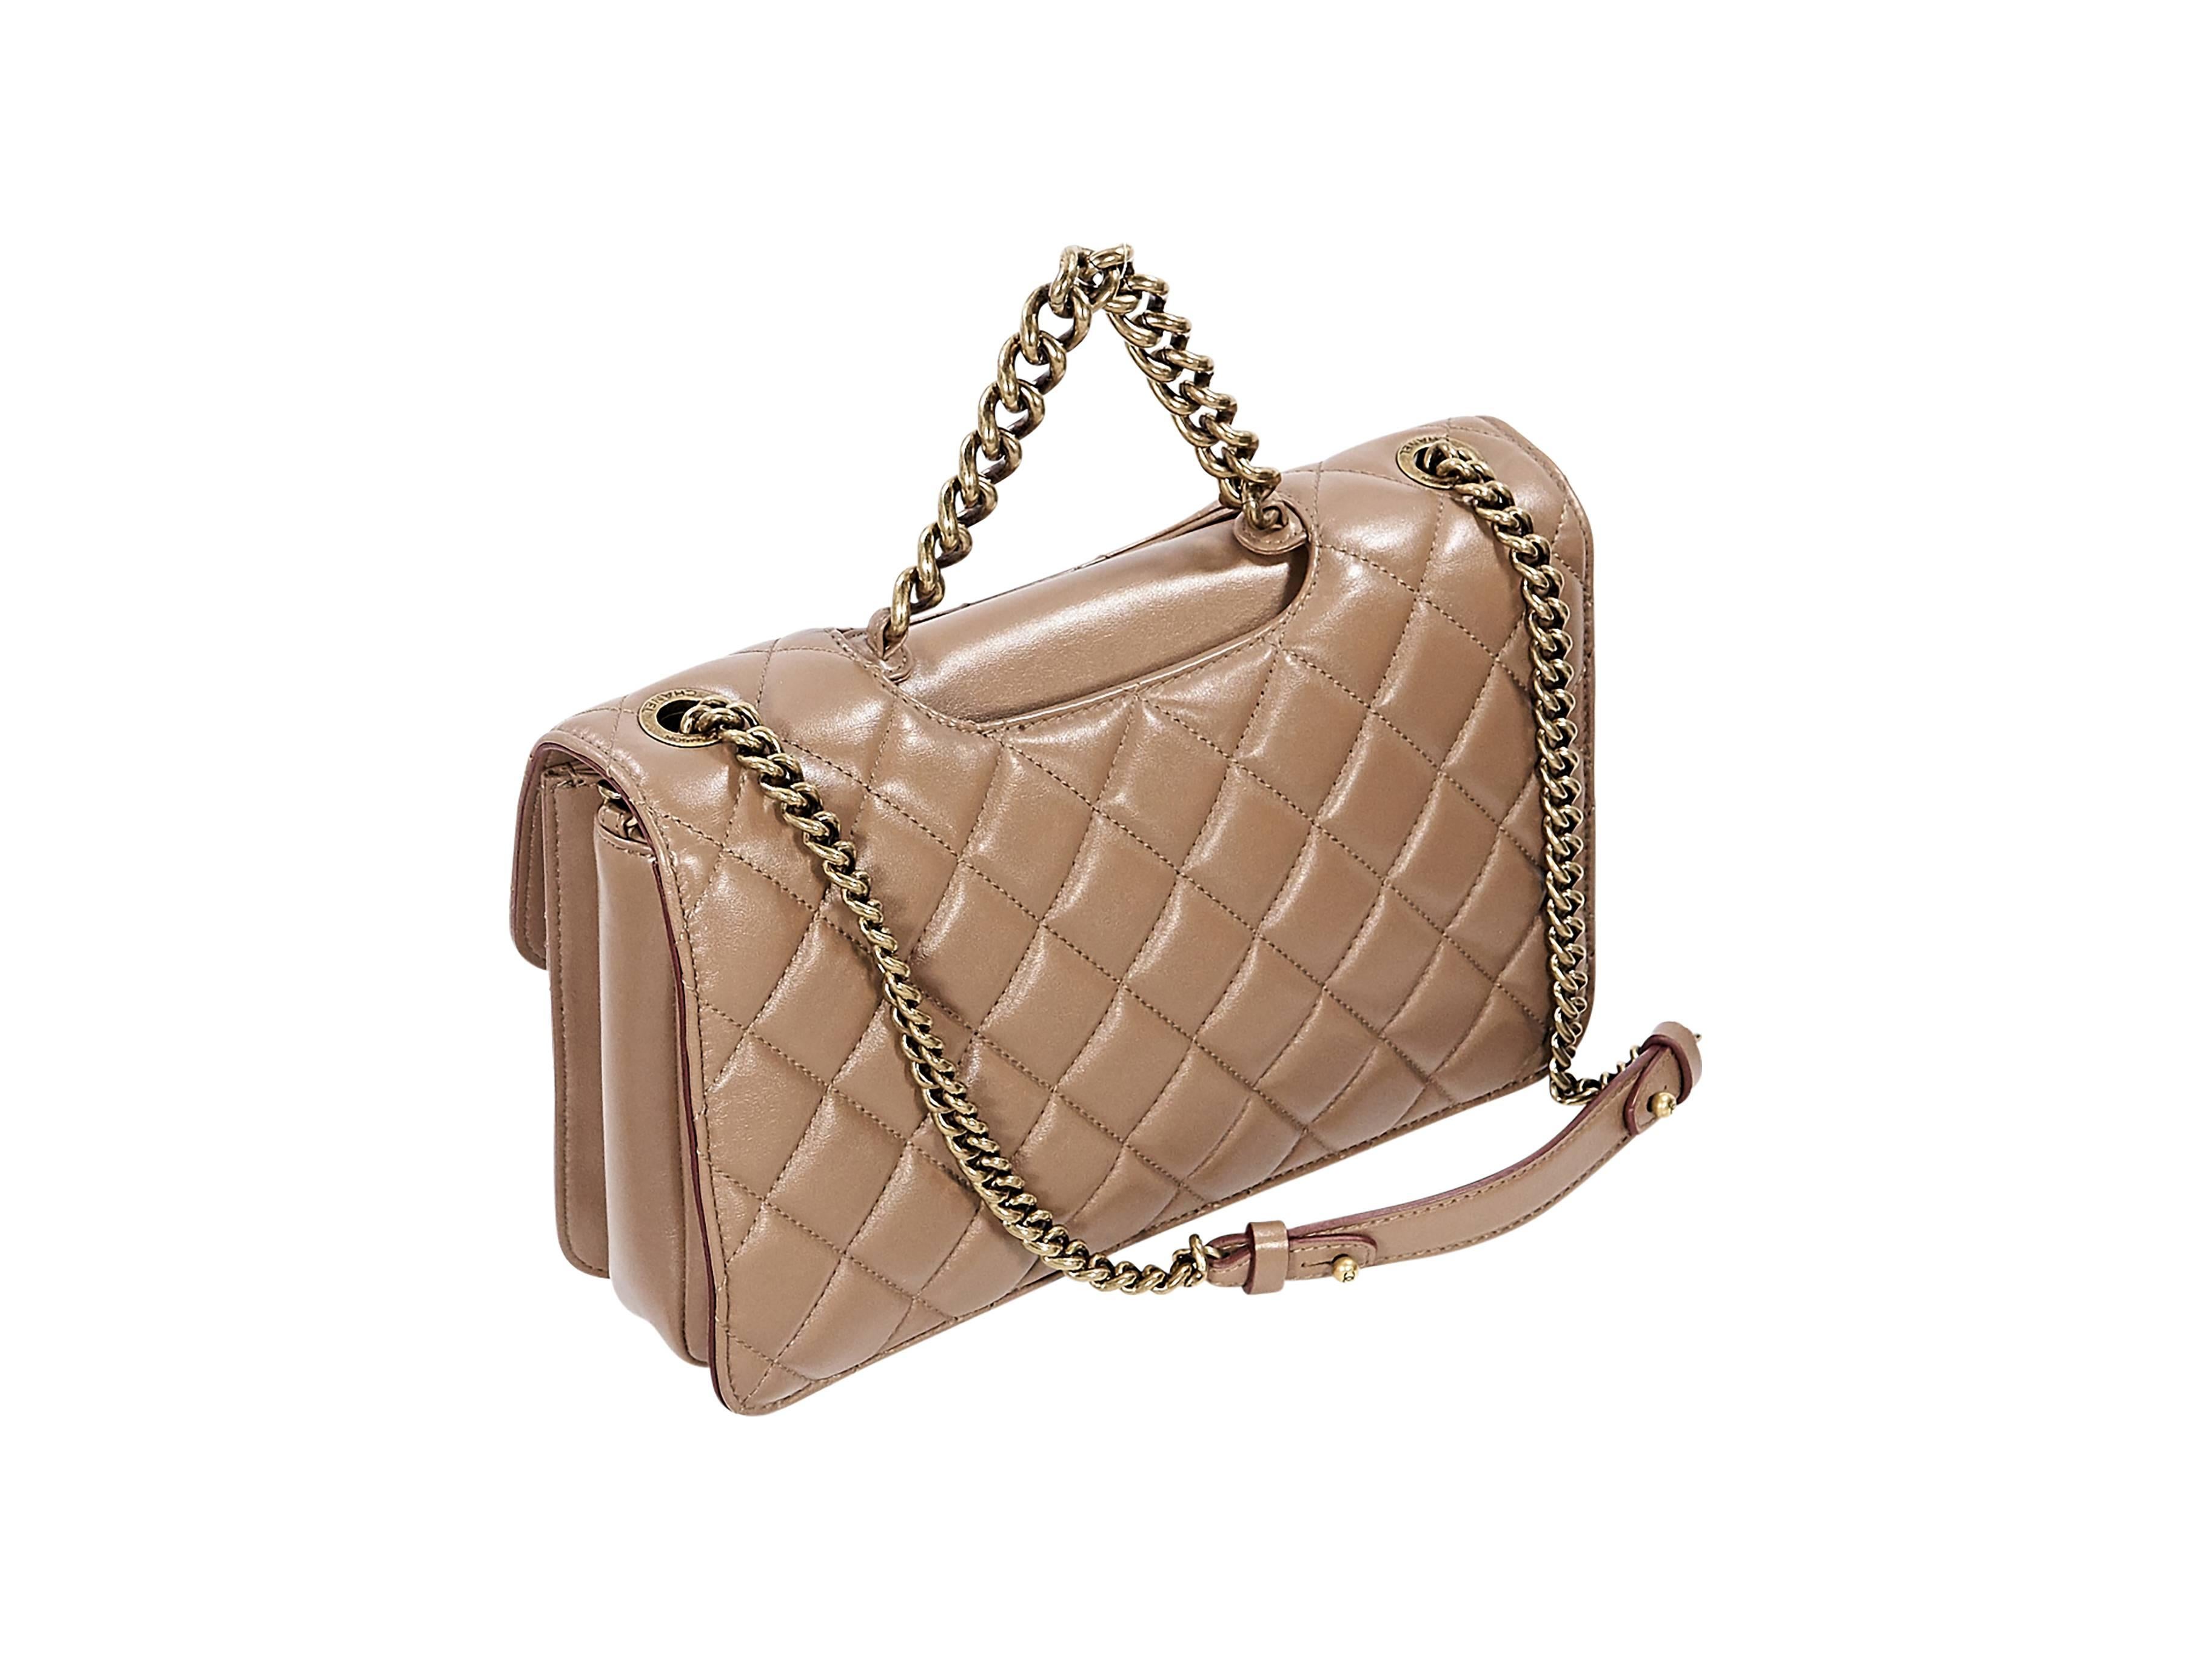 Brown Tan Chanel Quilted Leather Flap Bag